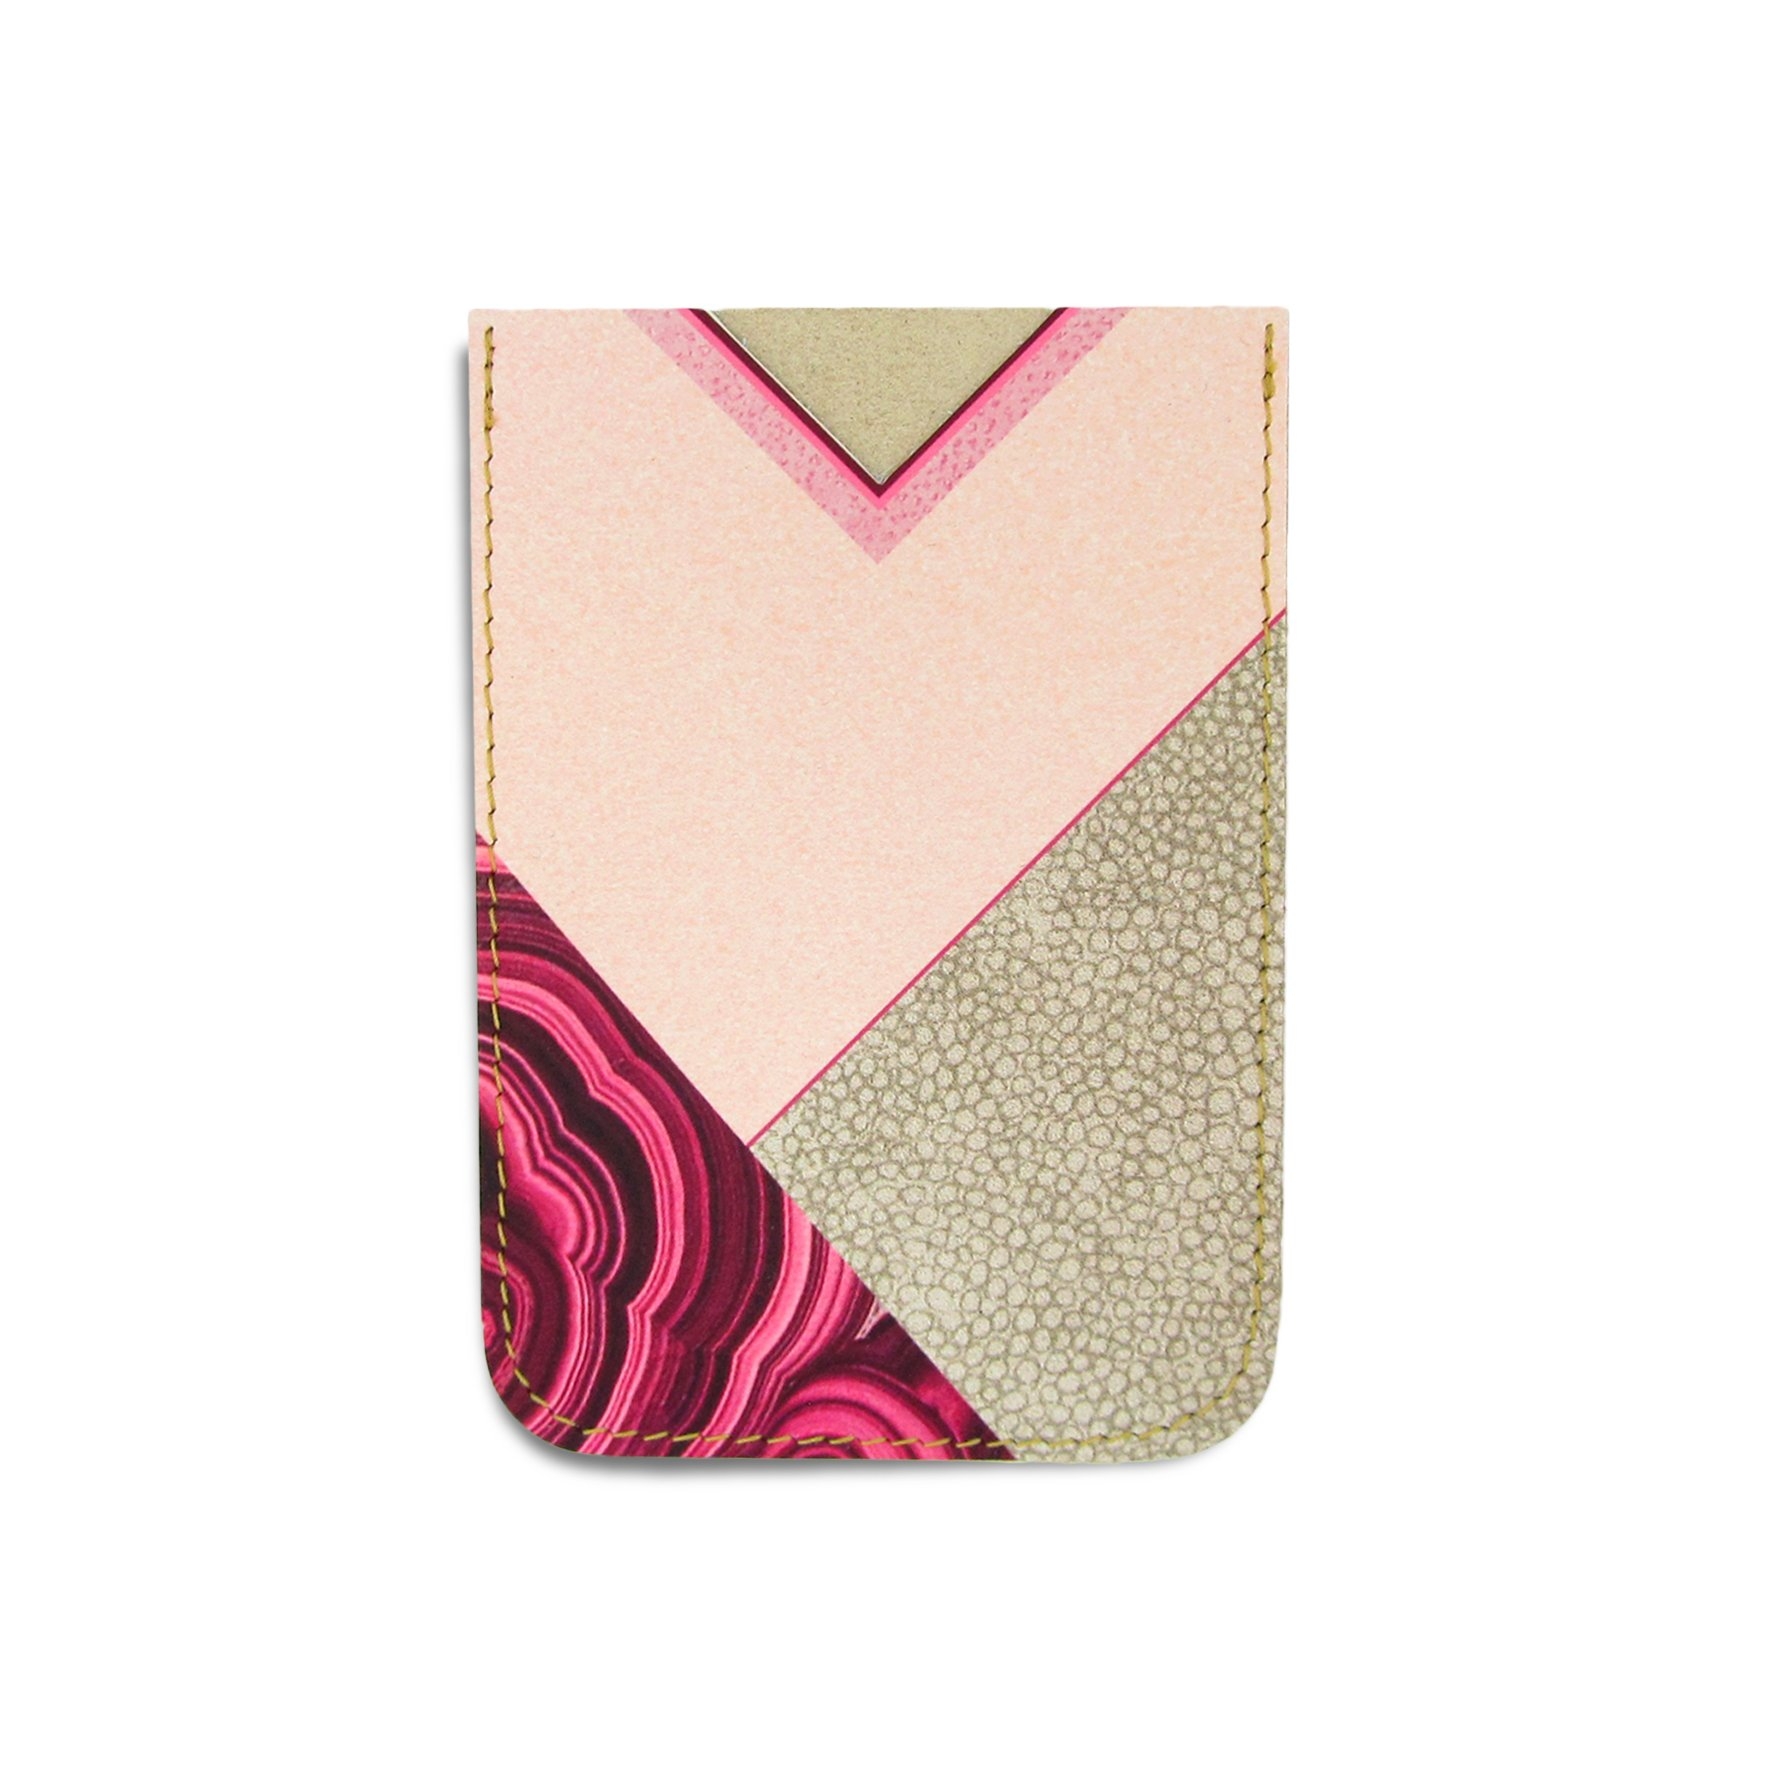 Leather Card Holder / Phone Sticker Wallet Pocket – Geometric Agate – Standard Card Holder / Without personalisation / Pink